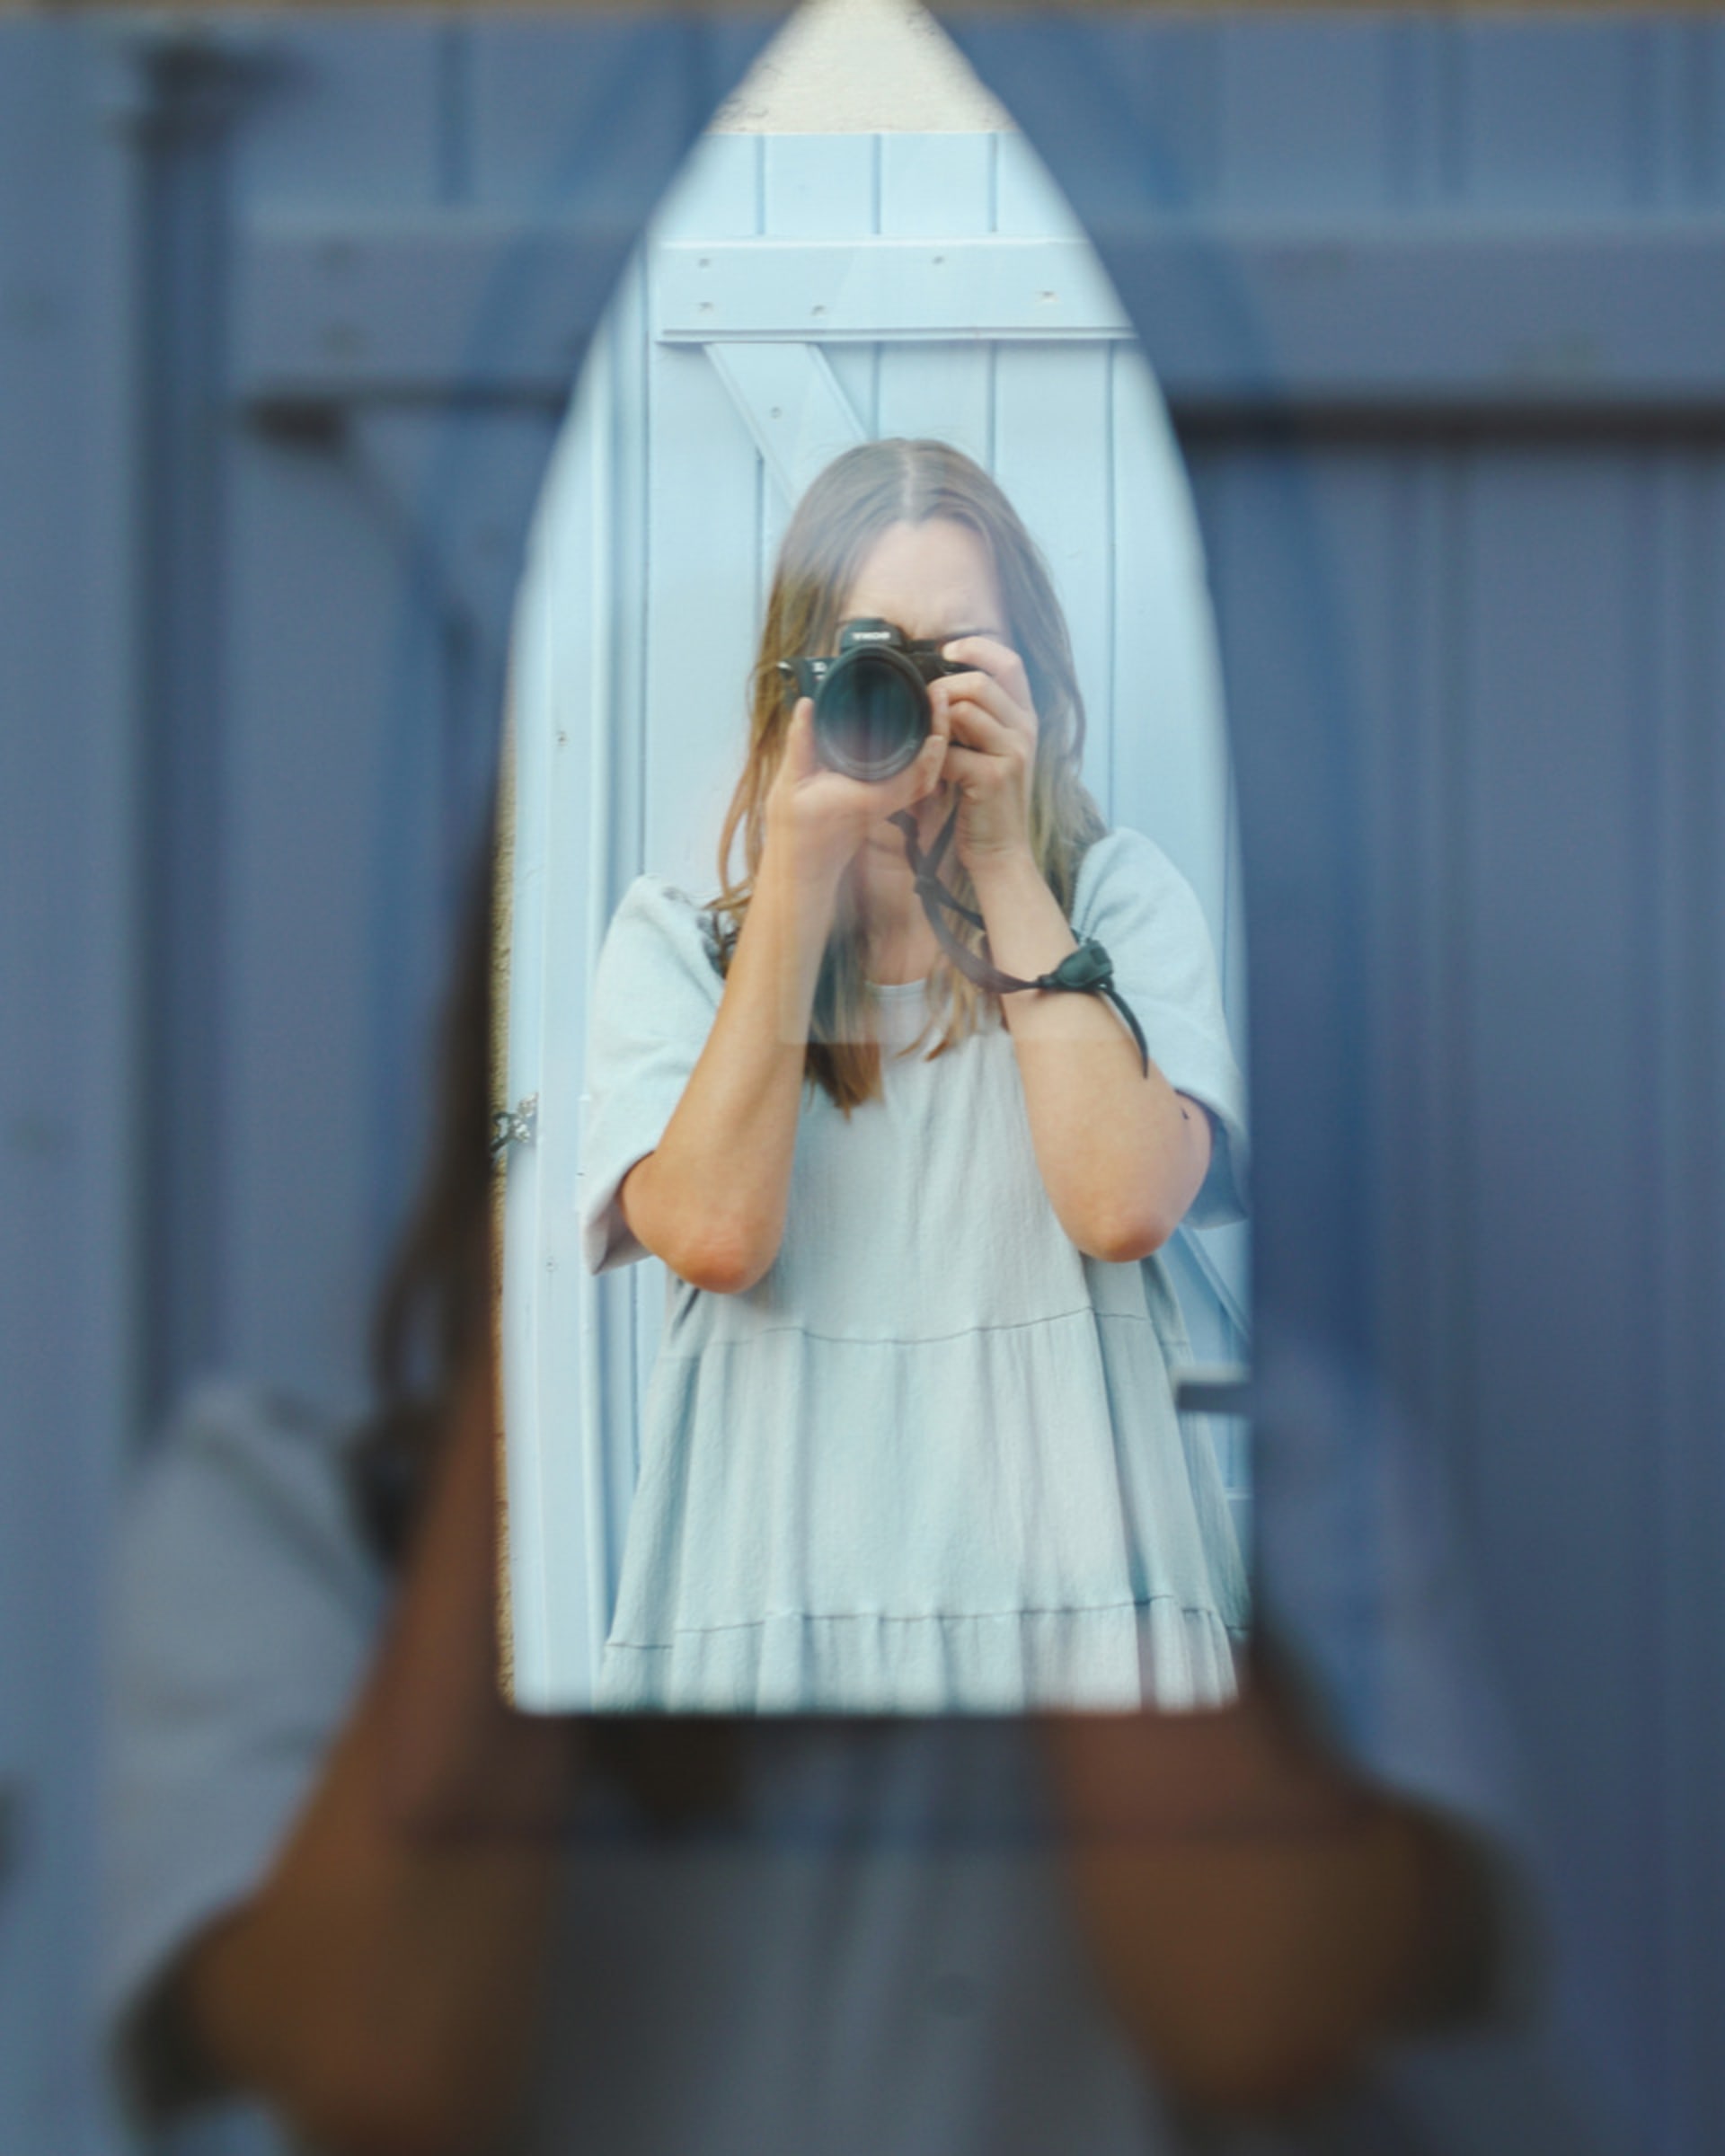 A woman wearing a blue dress is taking a photograph in a mirror behind a window creating a double reflection.